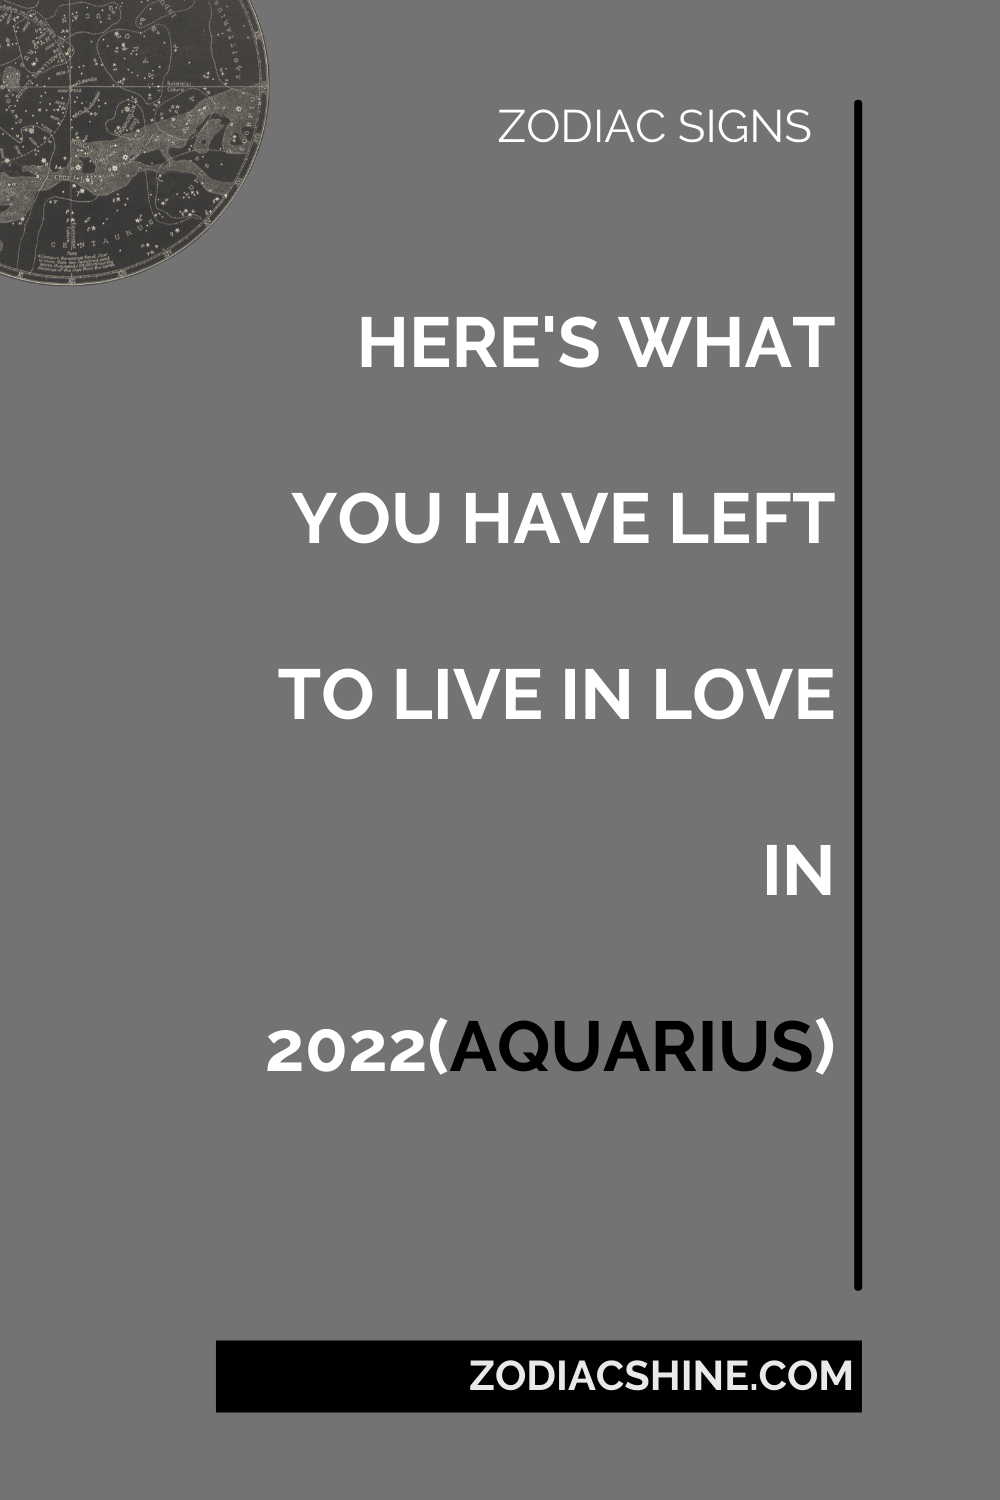 HERE'S WHAT YOU HAVE LEFT TO LIVE IN LOVE IN 2022(AQUARIUS)